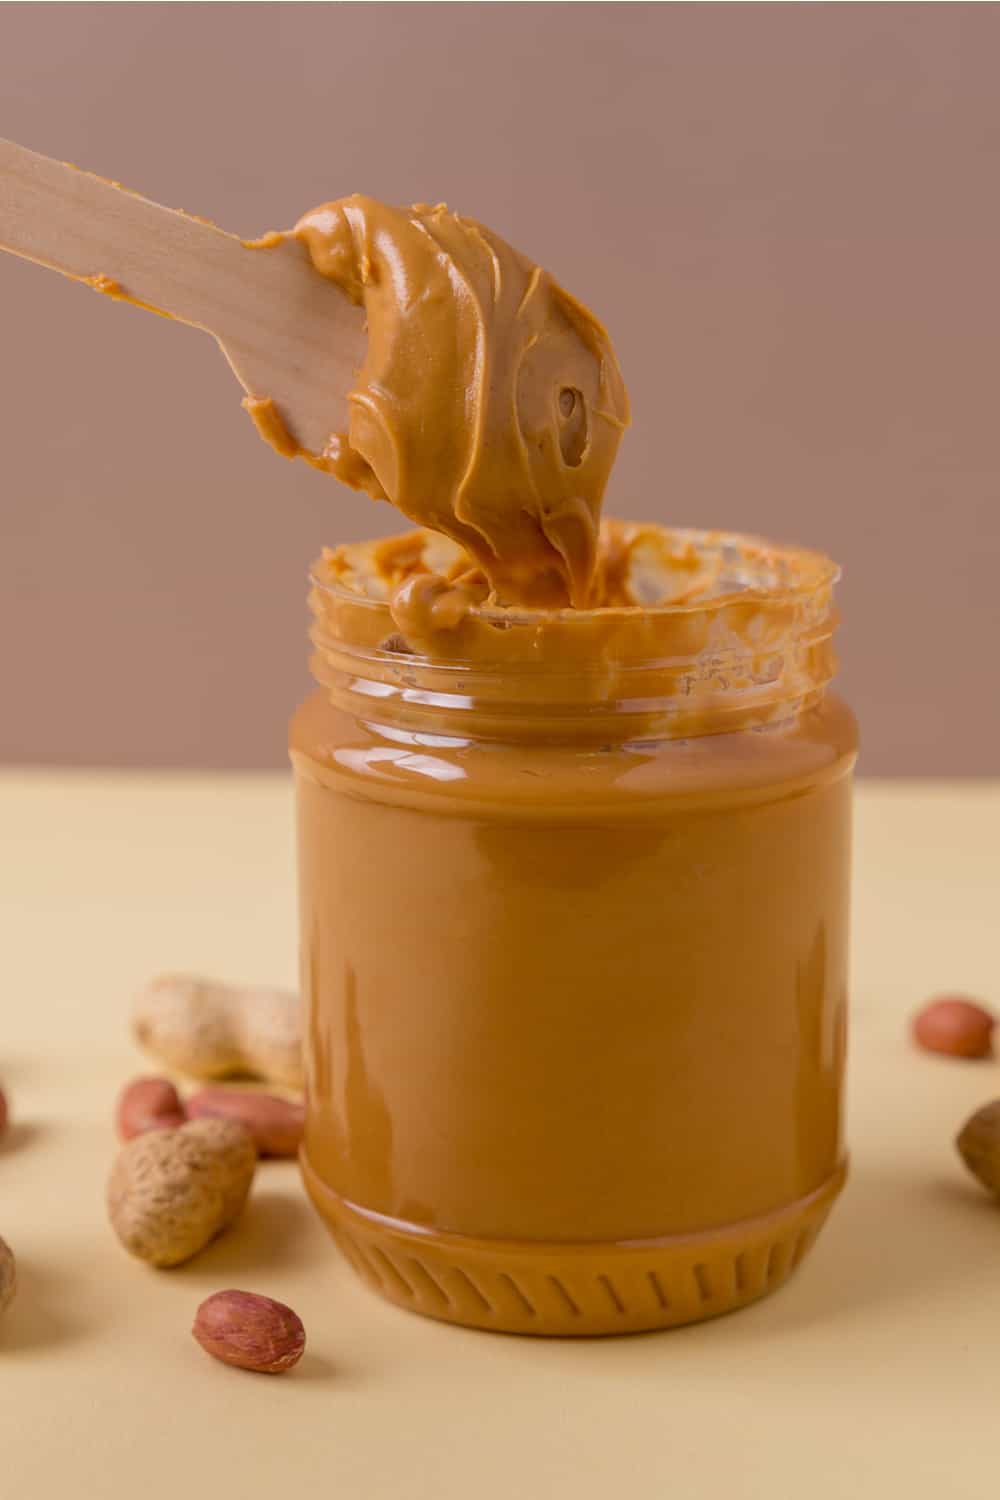 4 Tips to Tell if Peanut Butter Has Gone Bad